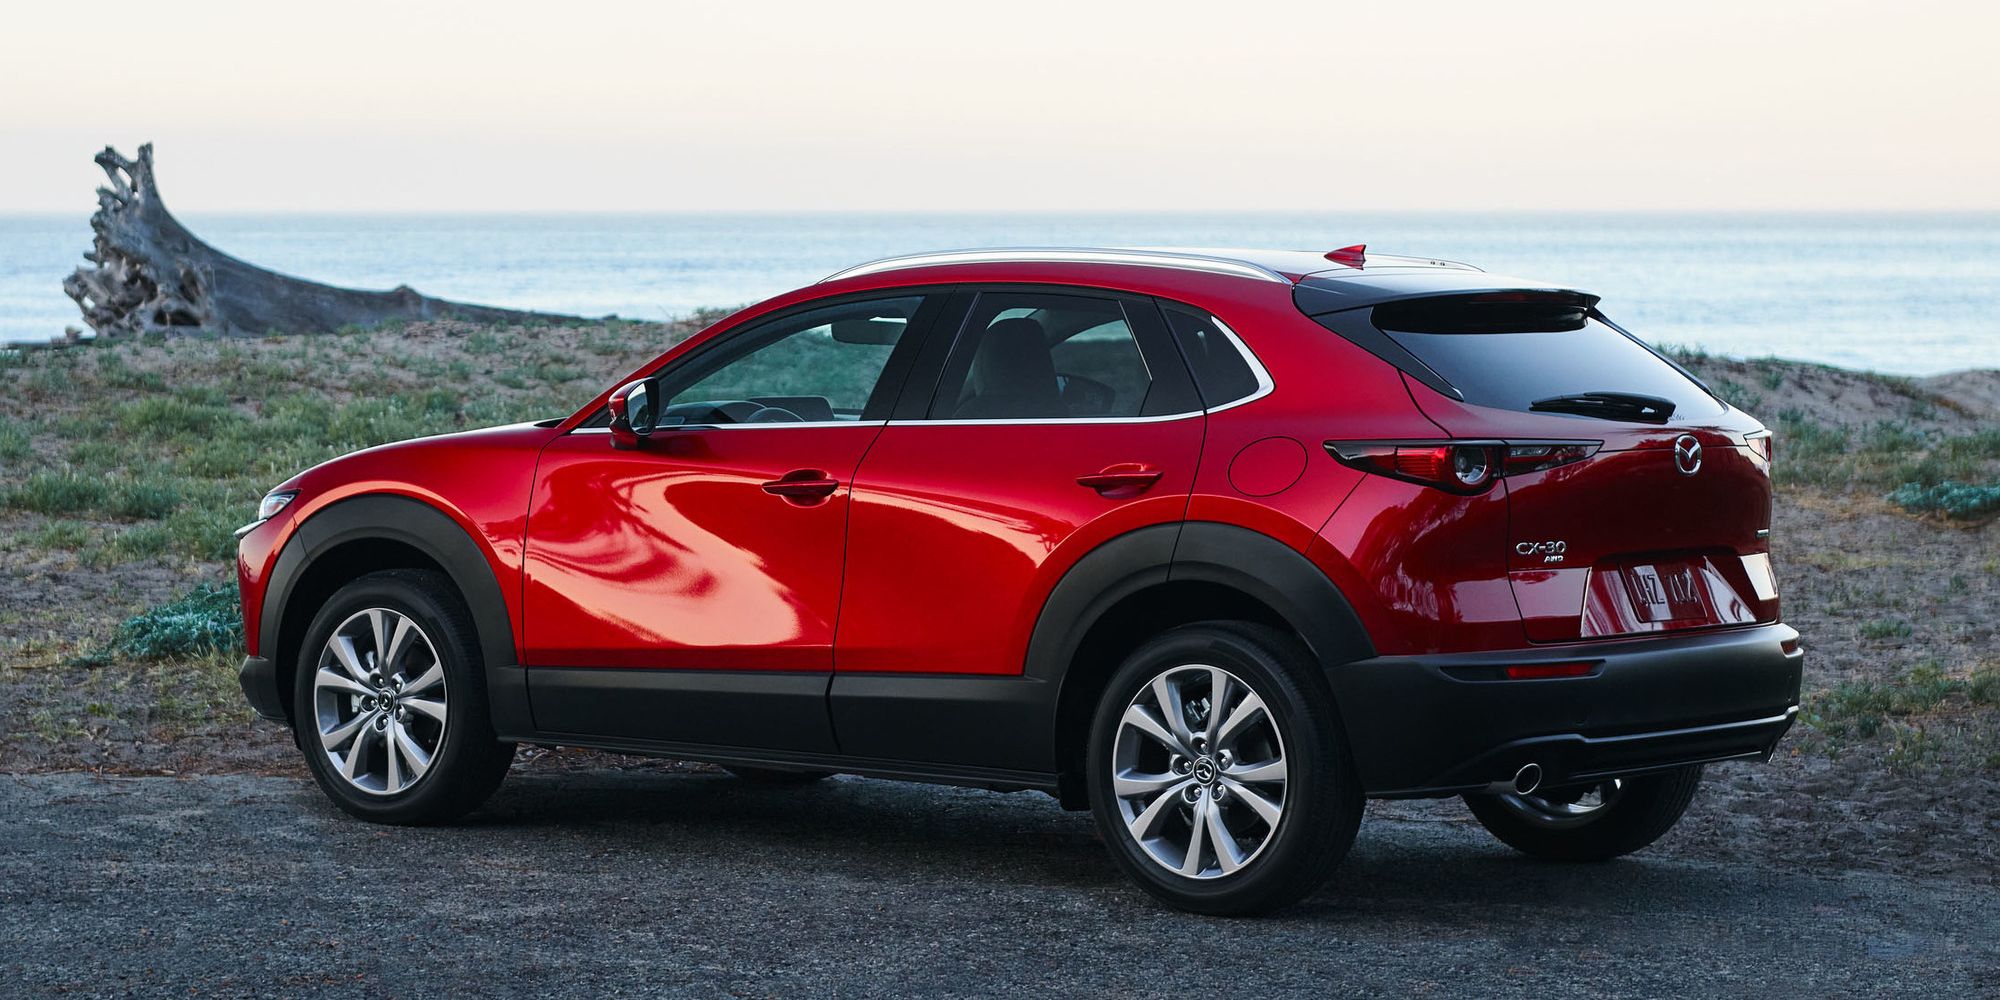 Rear 3/4 view of the CX-30